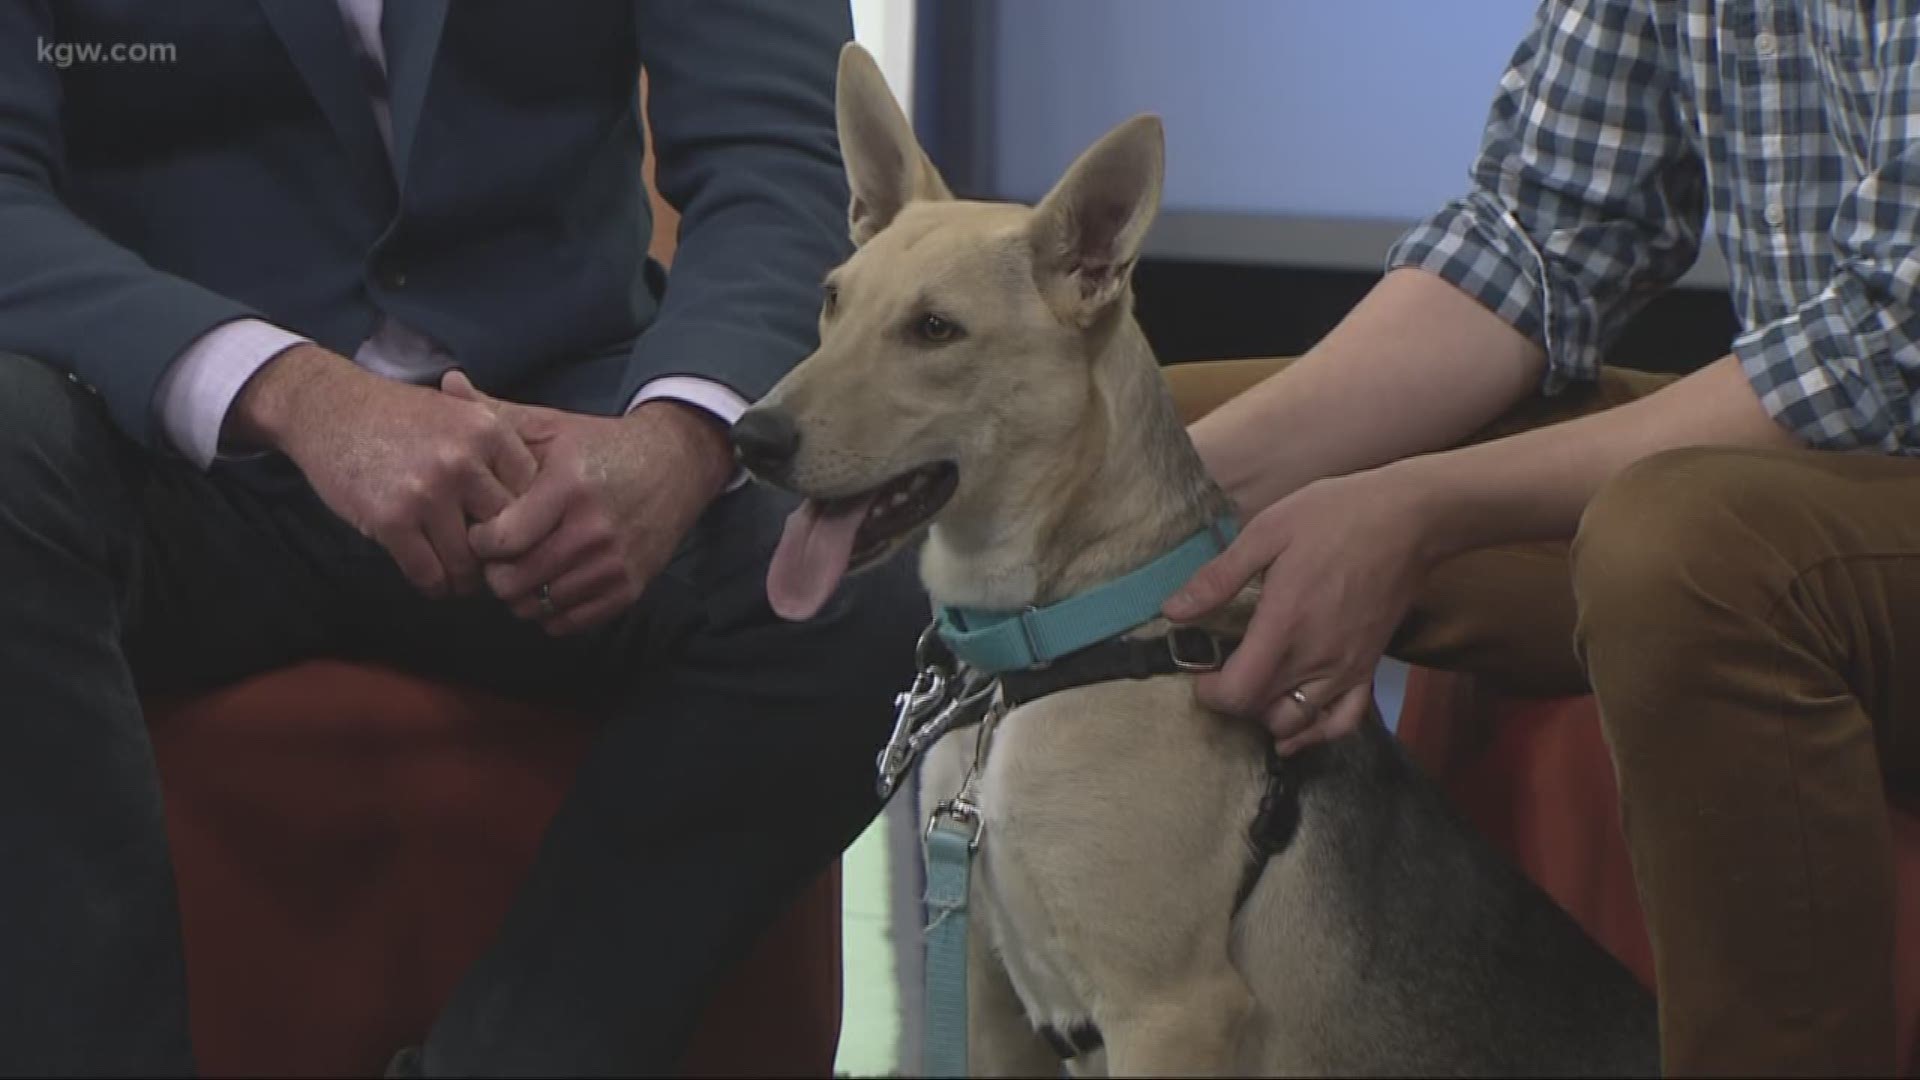 Sam Ellingson of the Oregon Humane Society for Southwest Washington stopped by KGW with Jax. He's a year old and now weights 37 pounds. Before coming to the shelter, Jax had his right rear leg amputated.